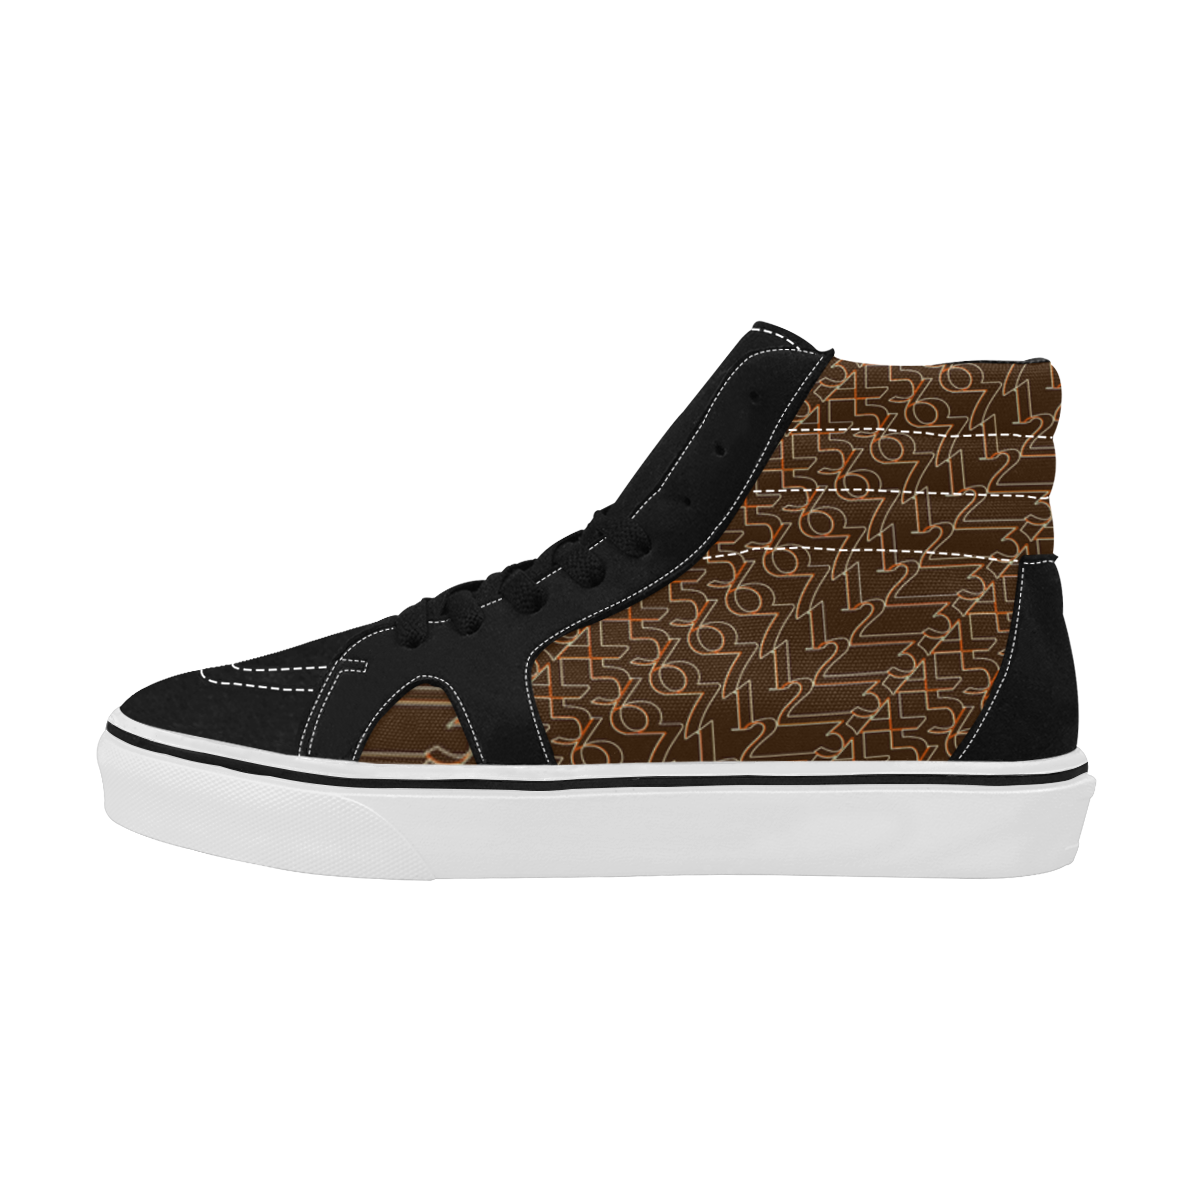 NUMBERS Collection 1234567 Brown/Black Men's High Top Skateboarding Shoes (Model E001-1)